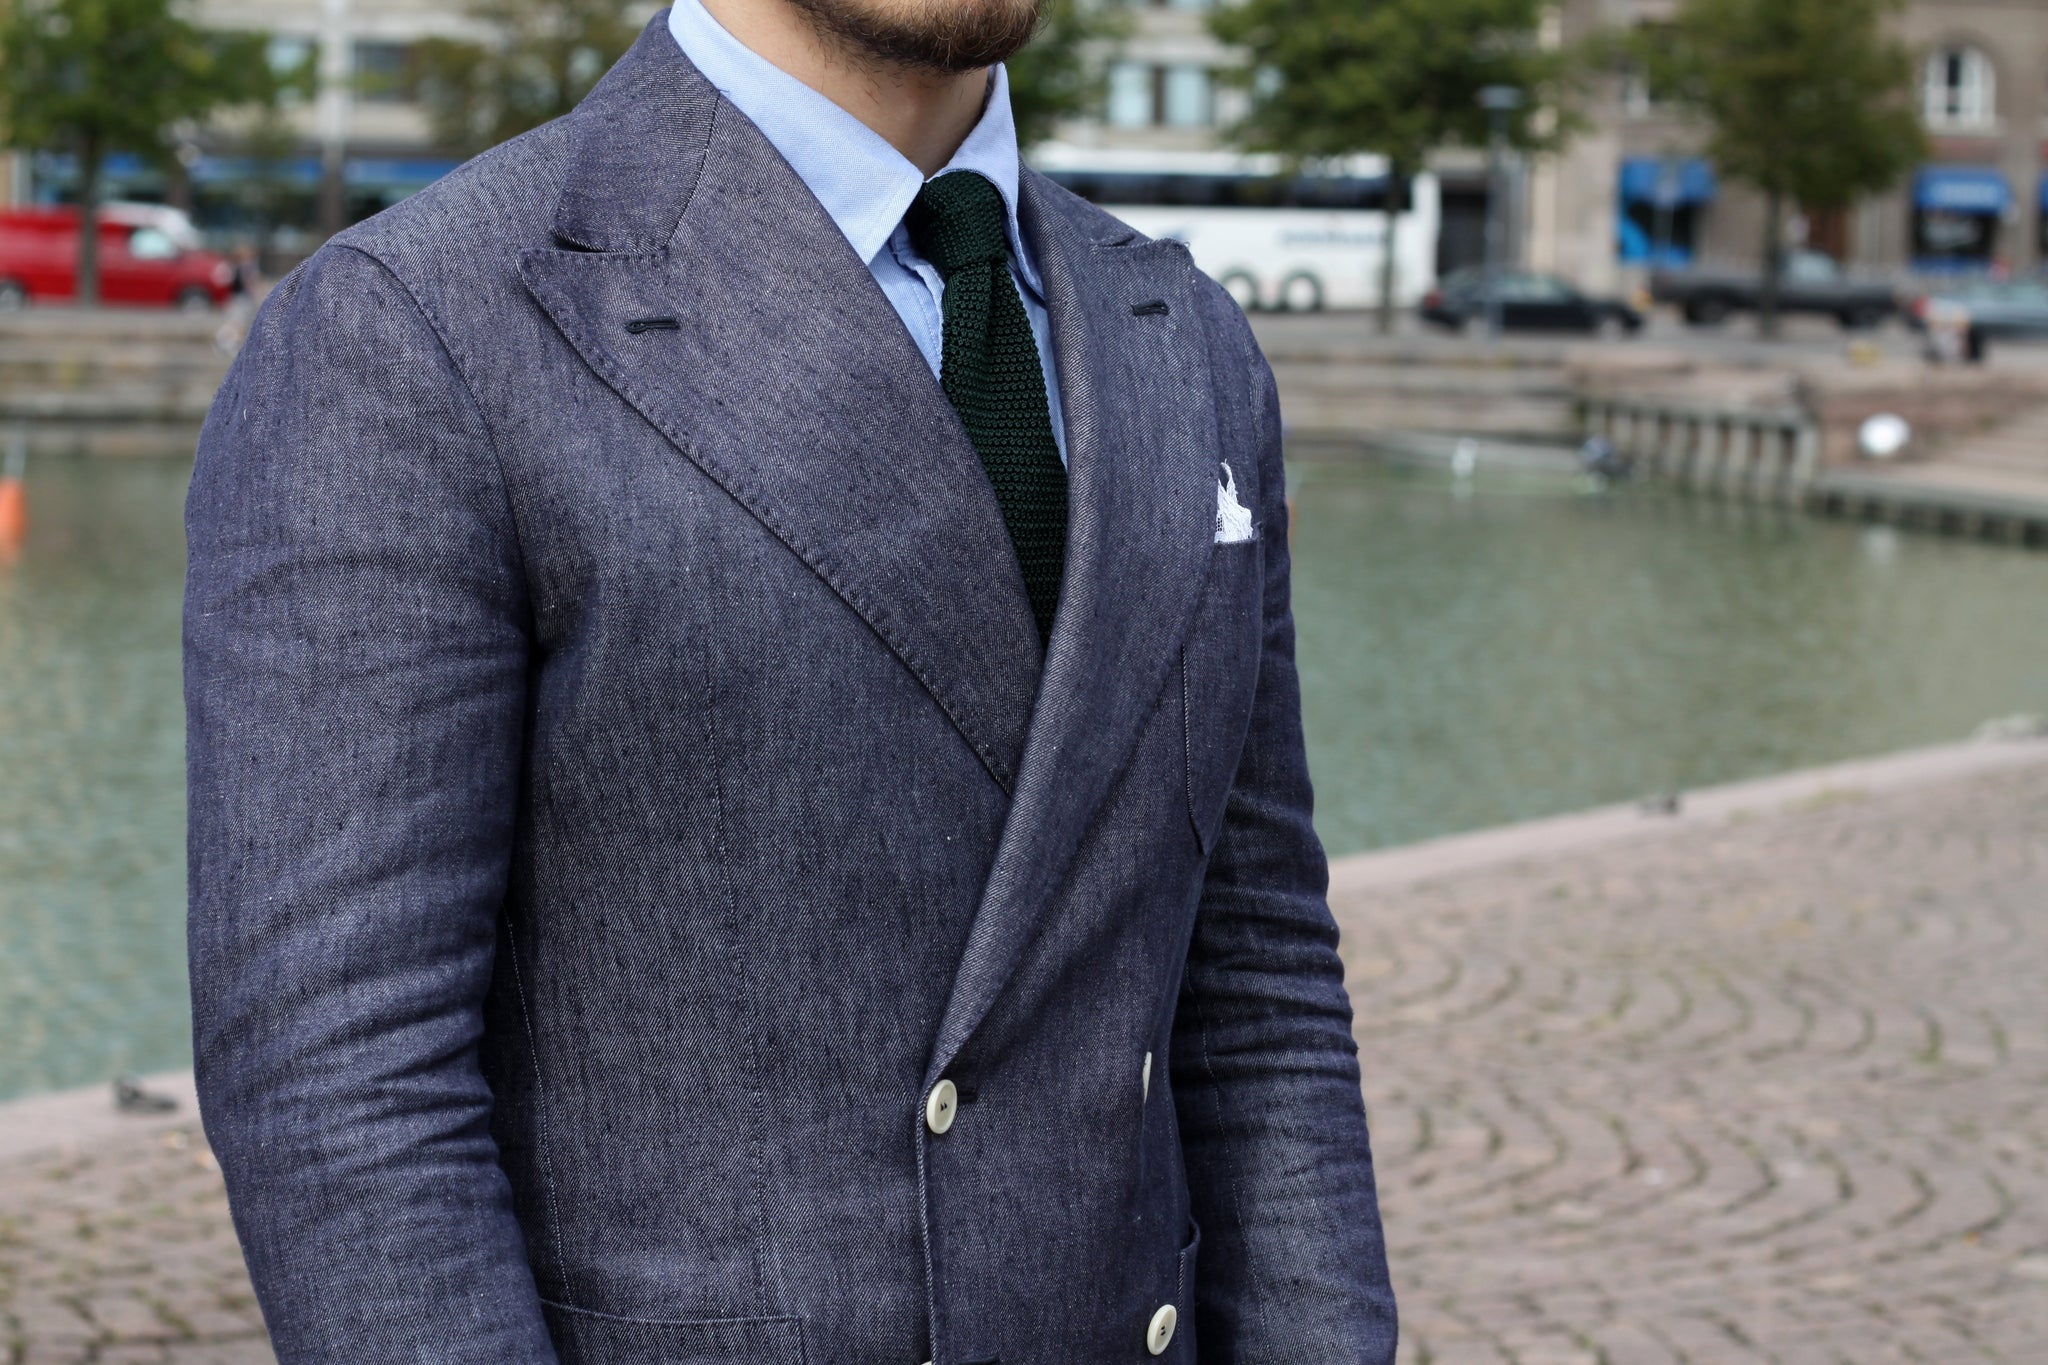 Suit trousers combined with double-breasted linen blazer